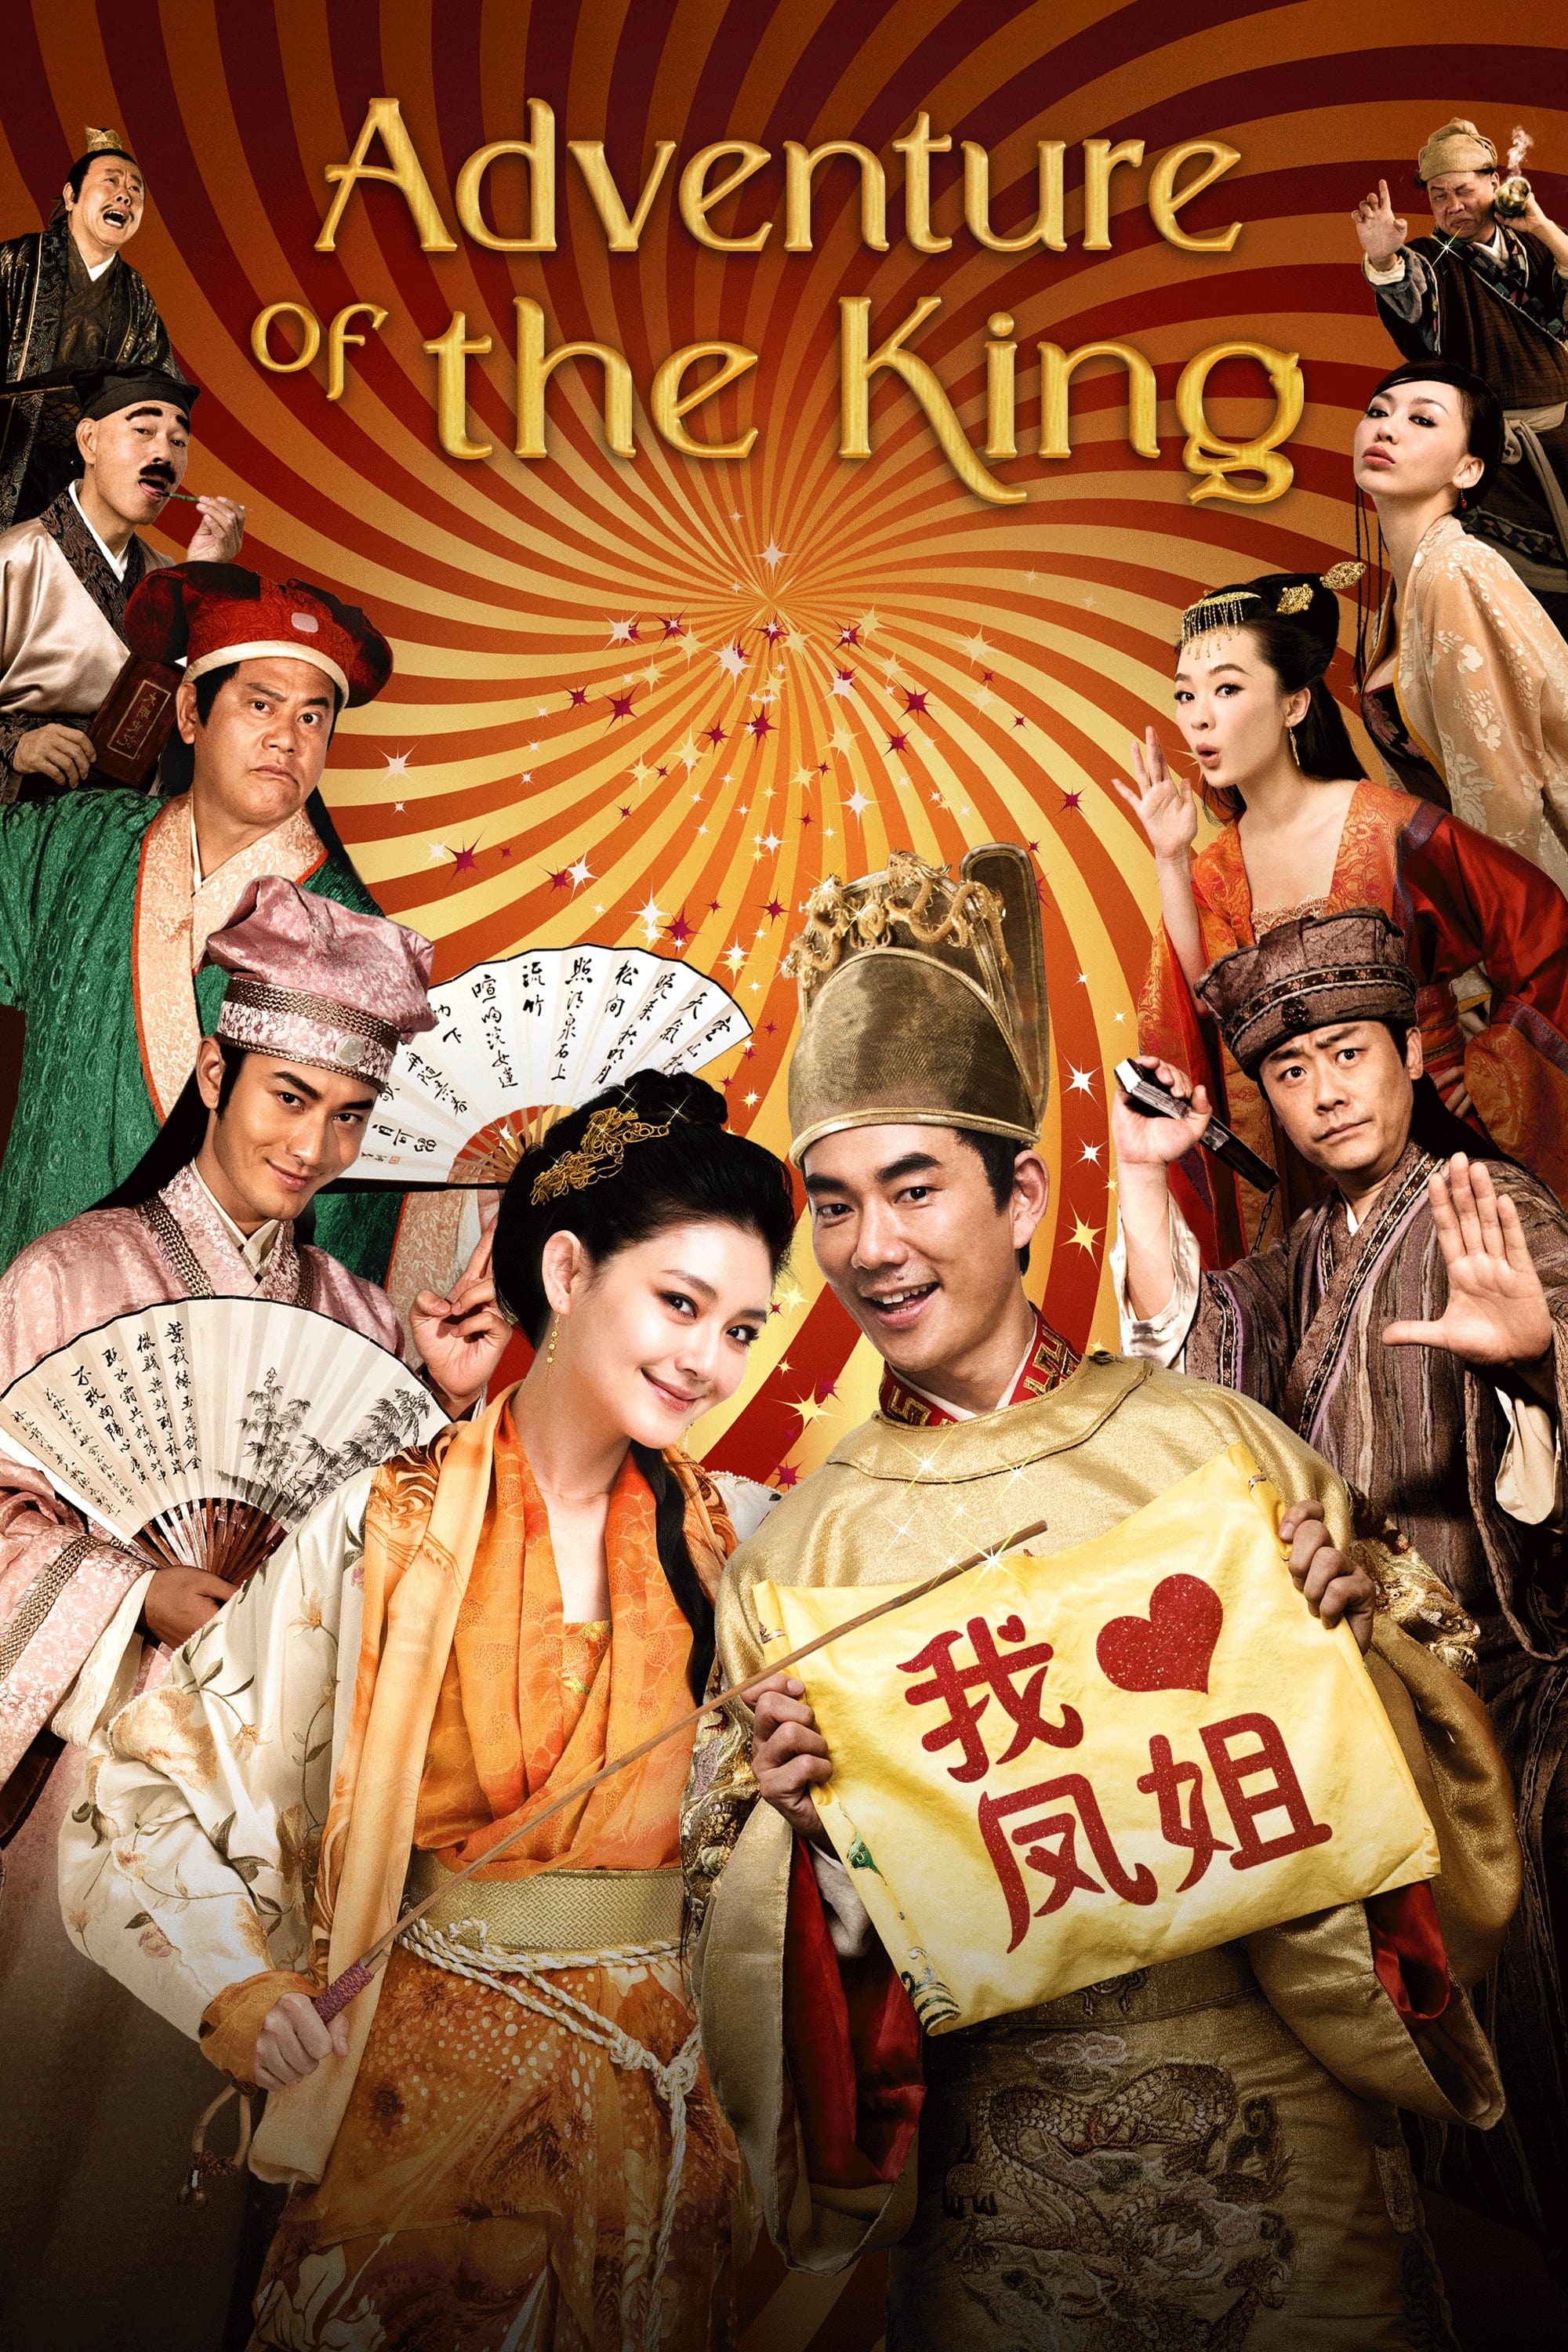 The Adventure Of The King (2010)